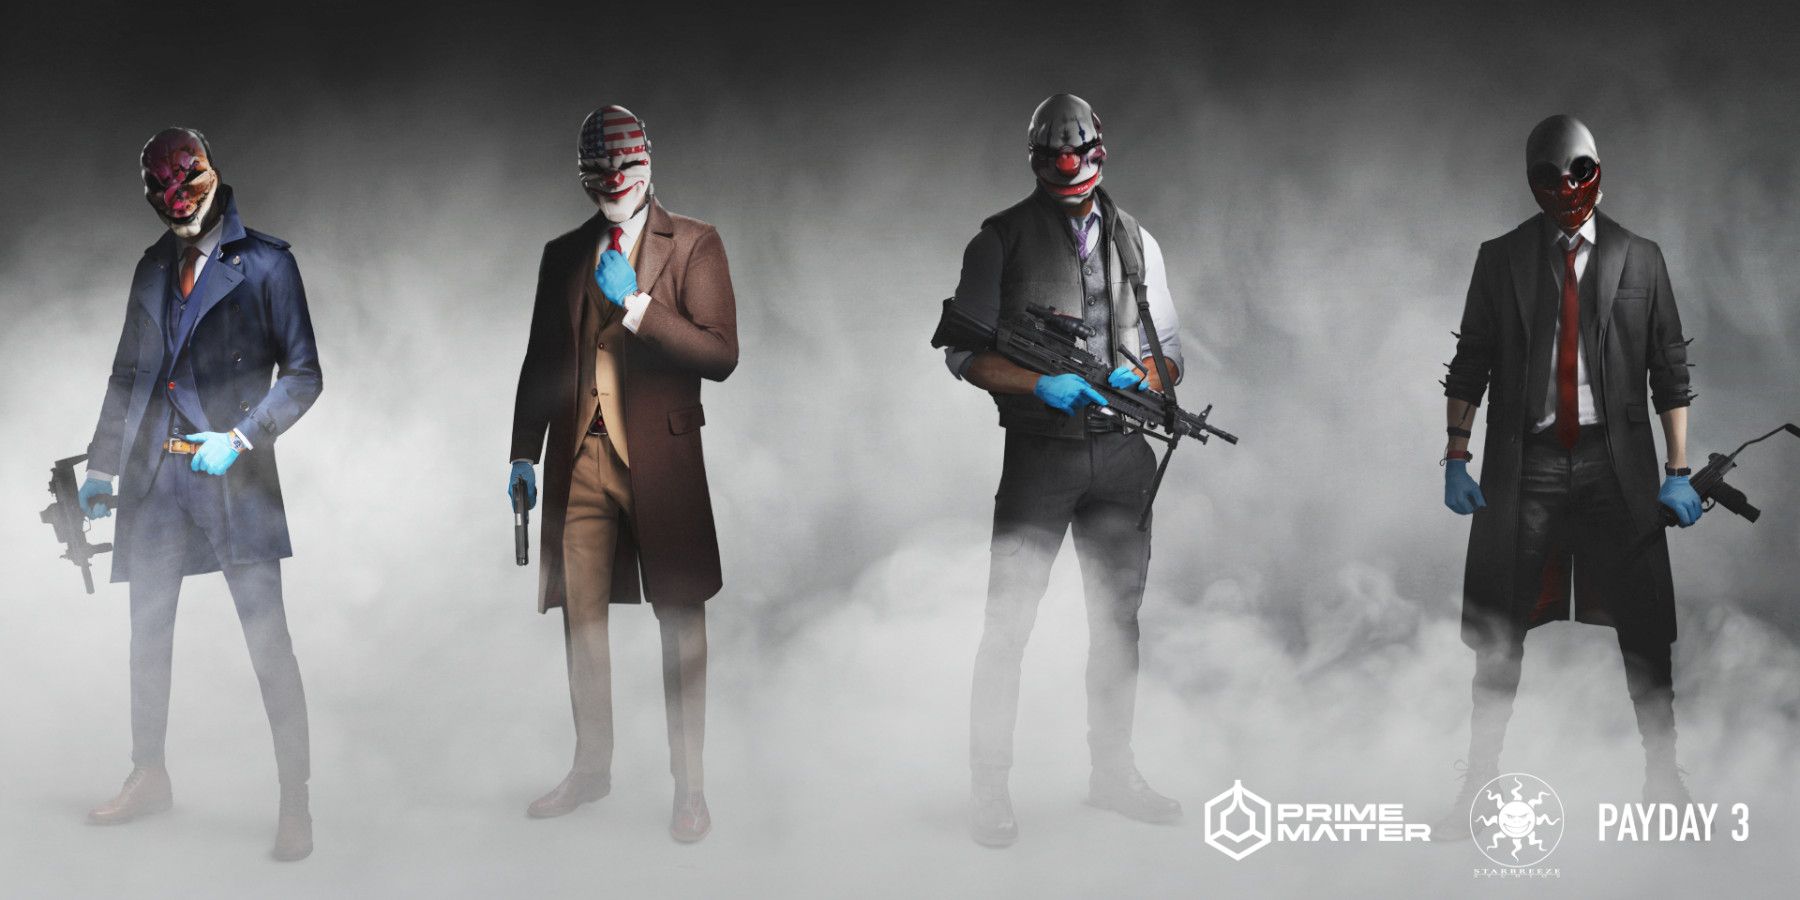 payday-3-work-in-progress-character-models